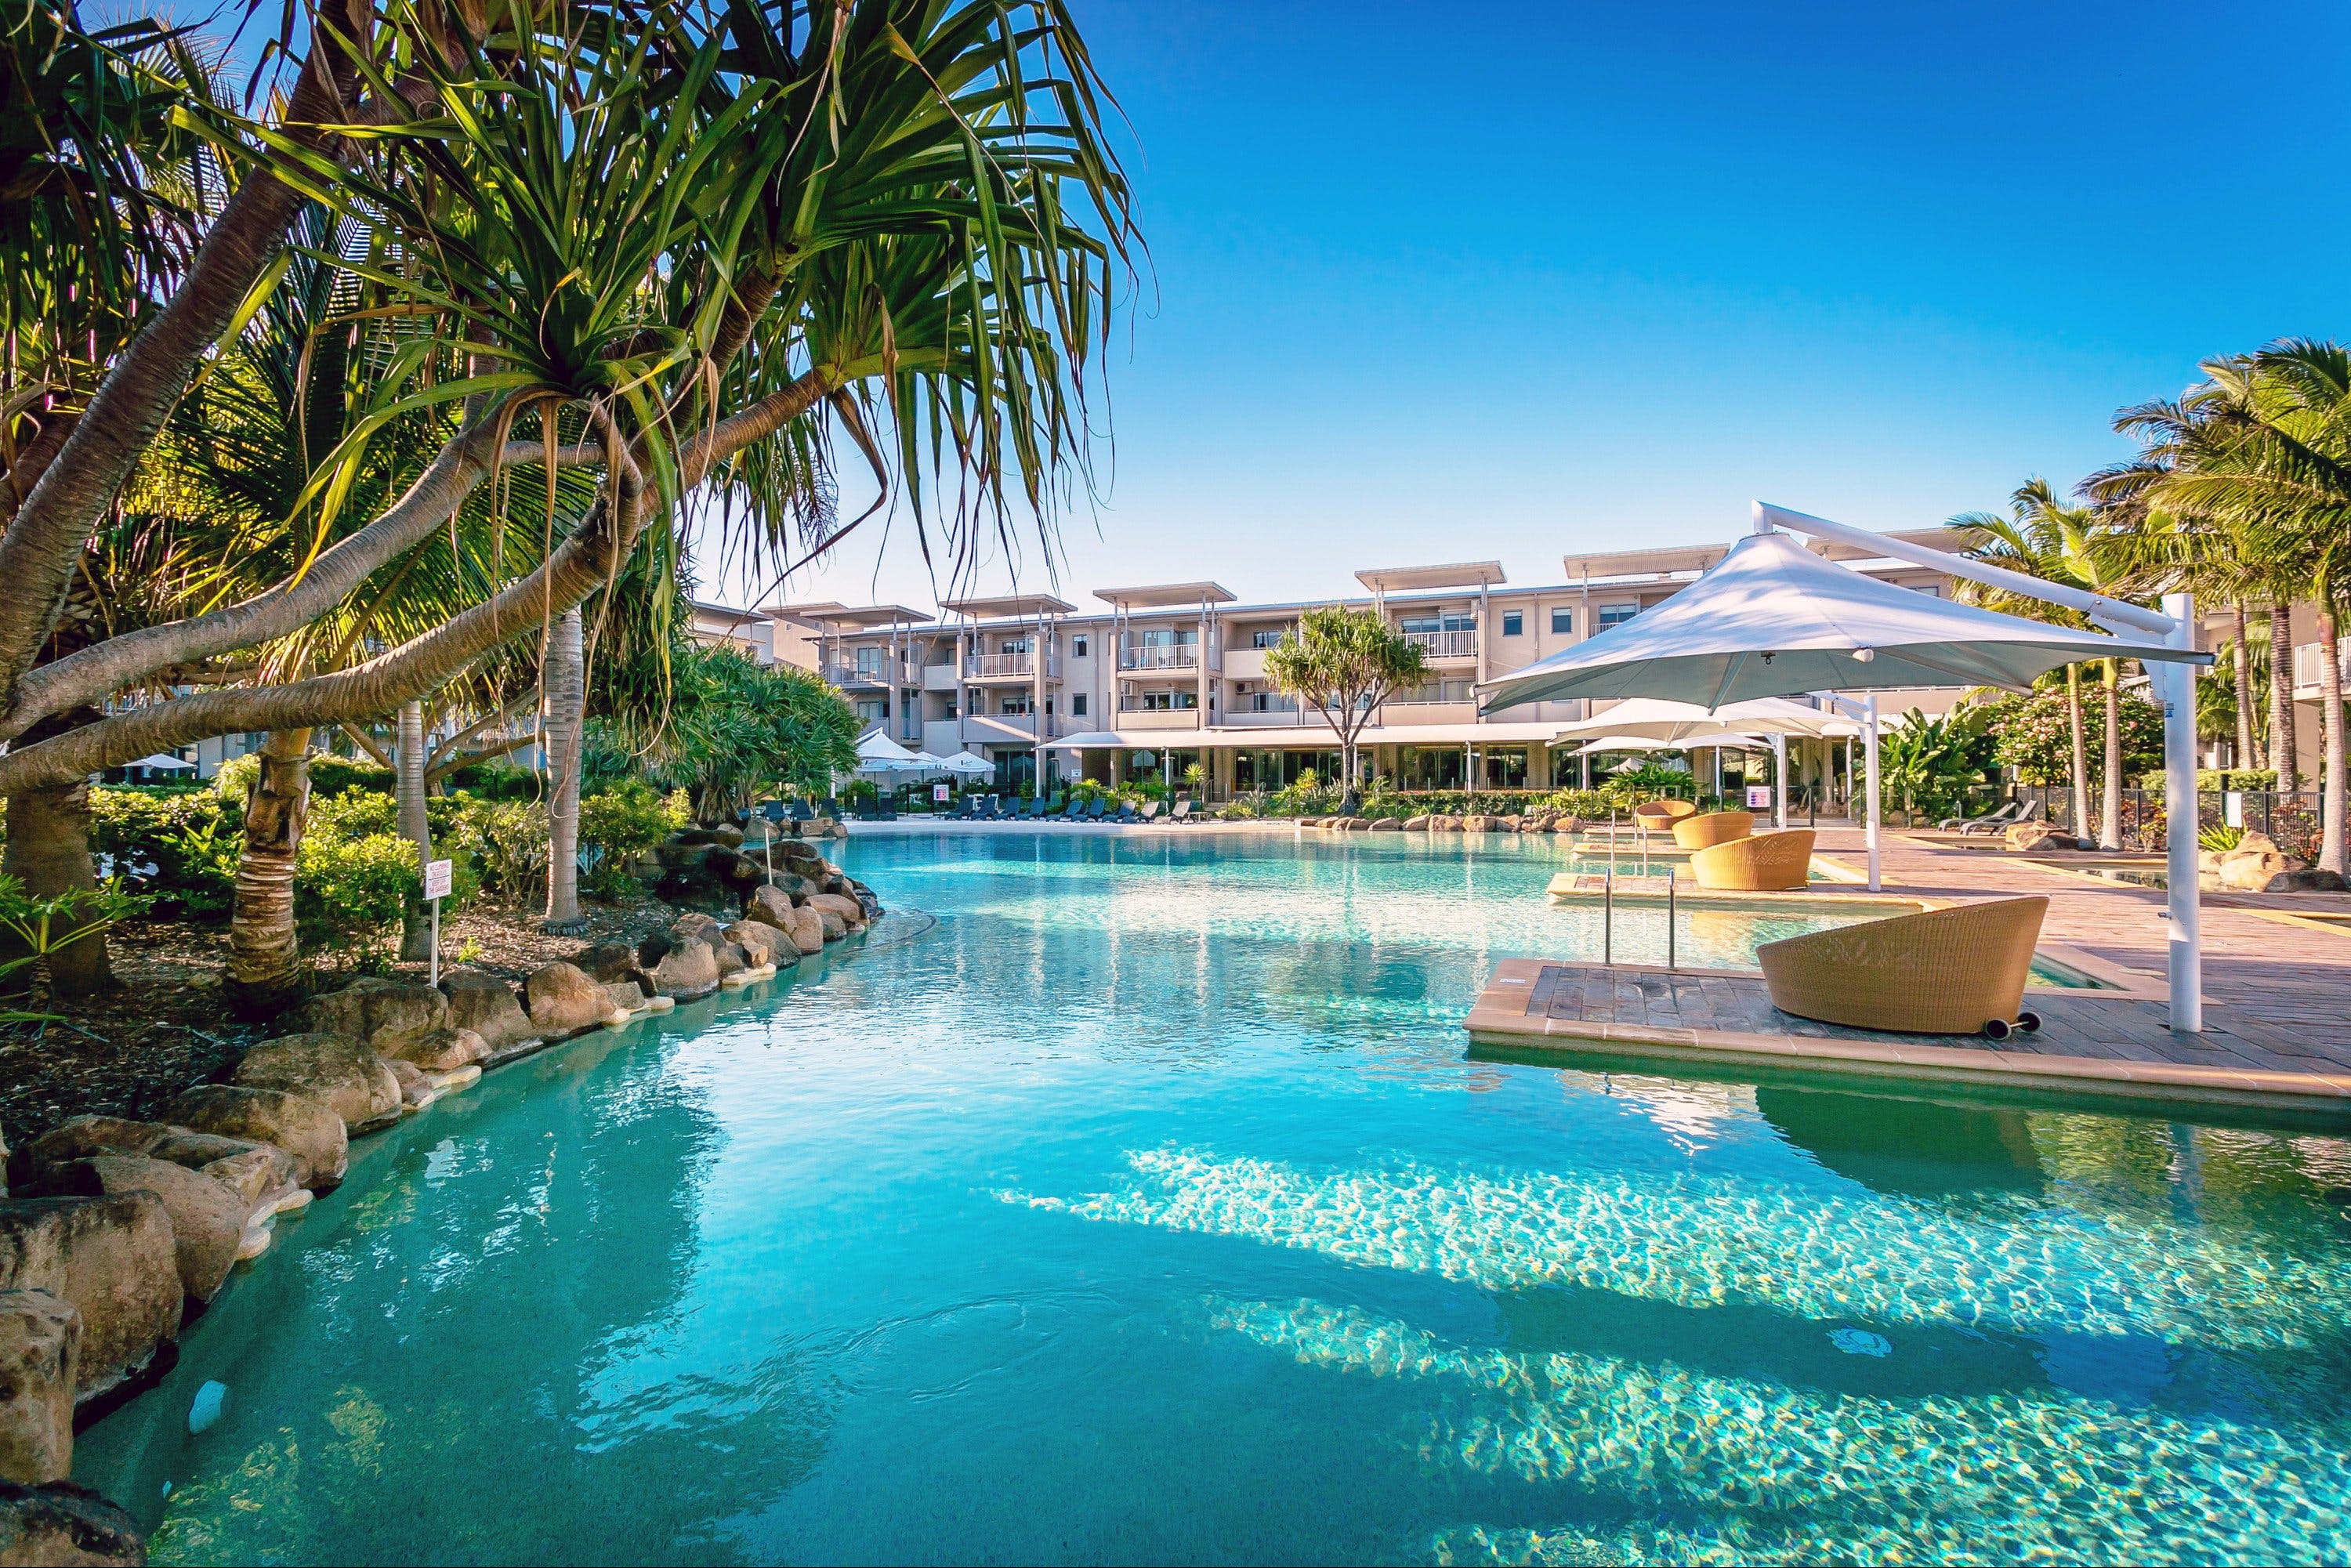 Peppers Salt Resort and Spa - Coogee Beach Accommodation